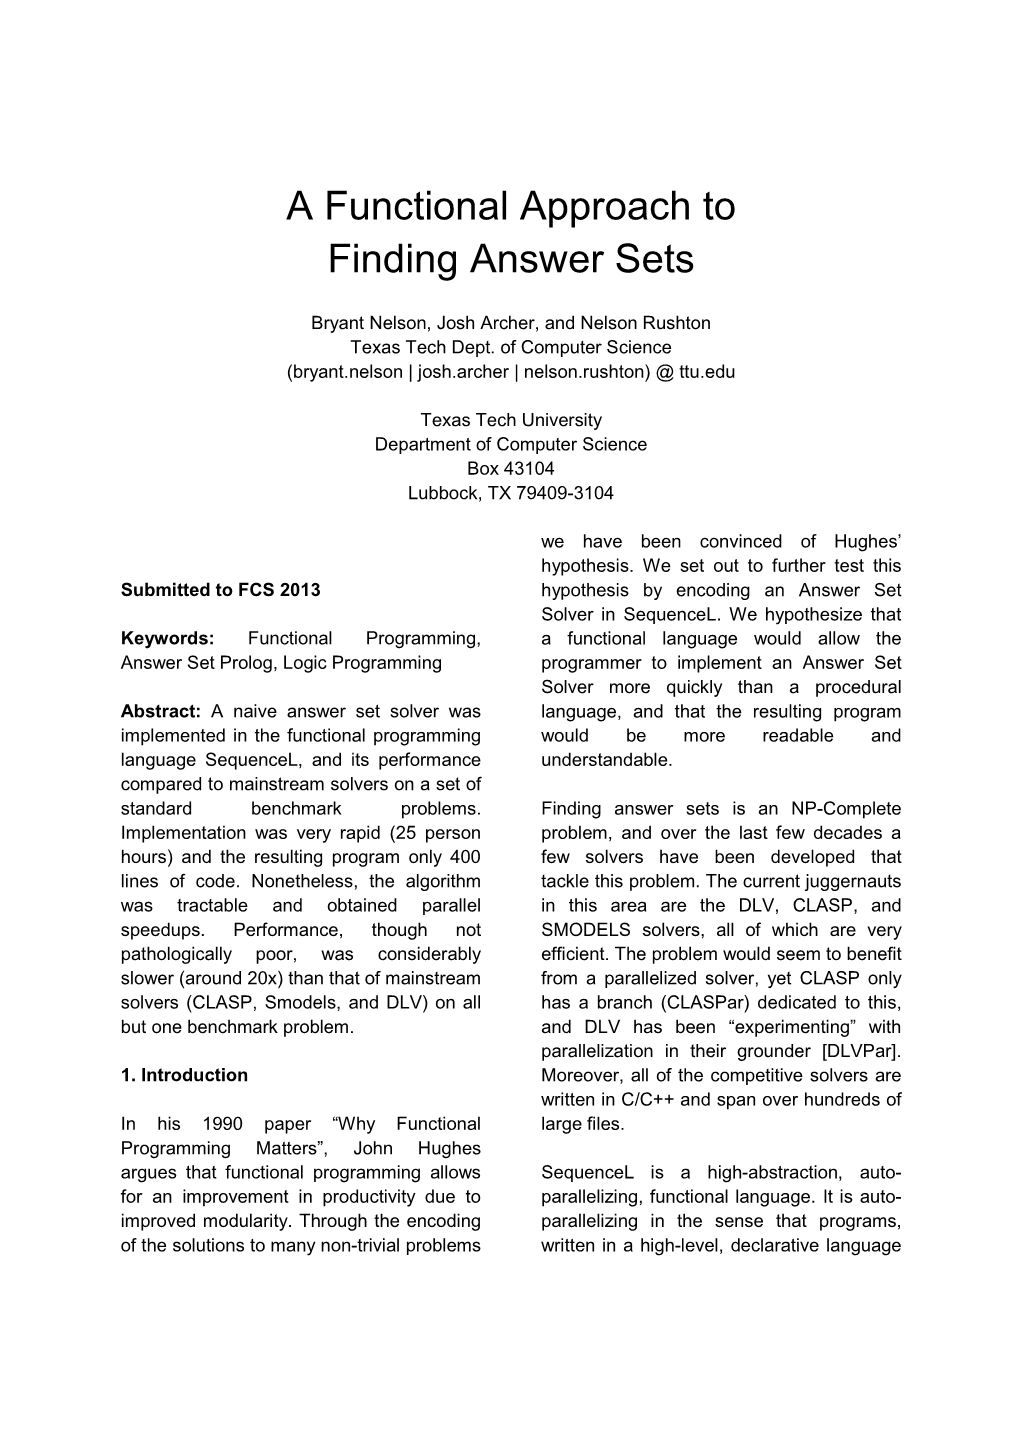 A Functional Approach to Finding Answer Sets